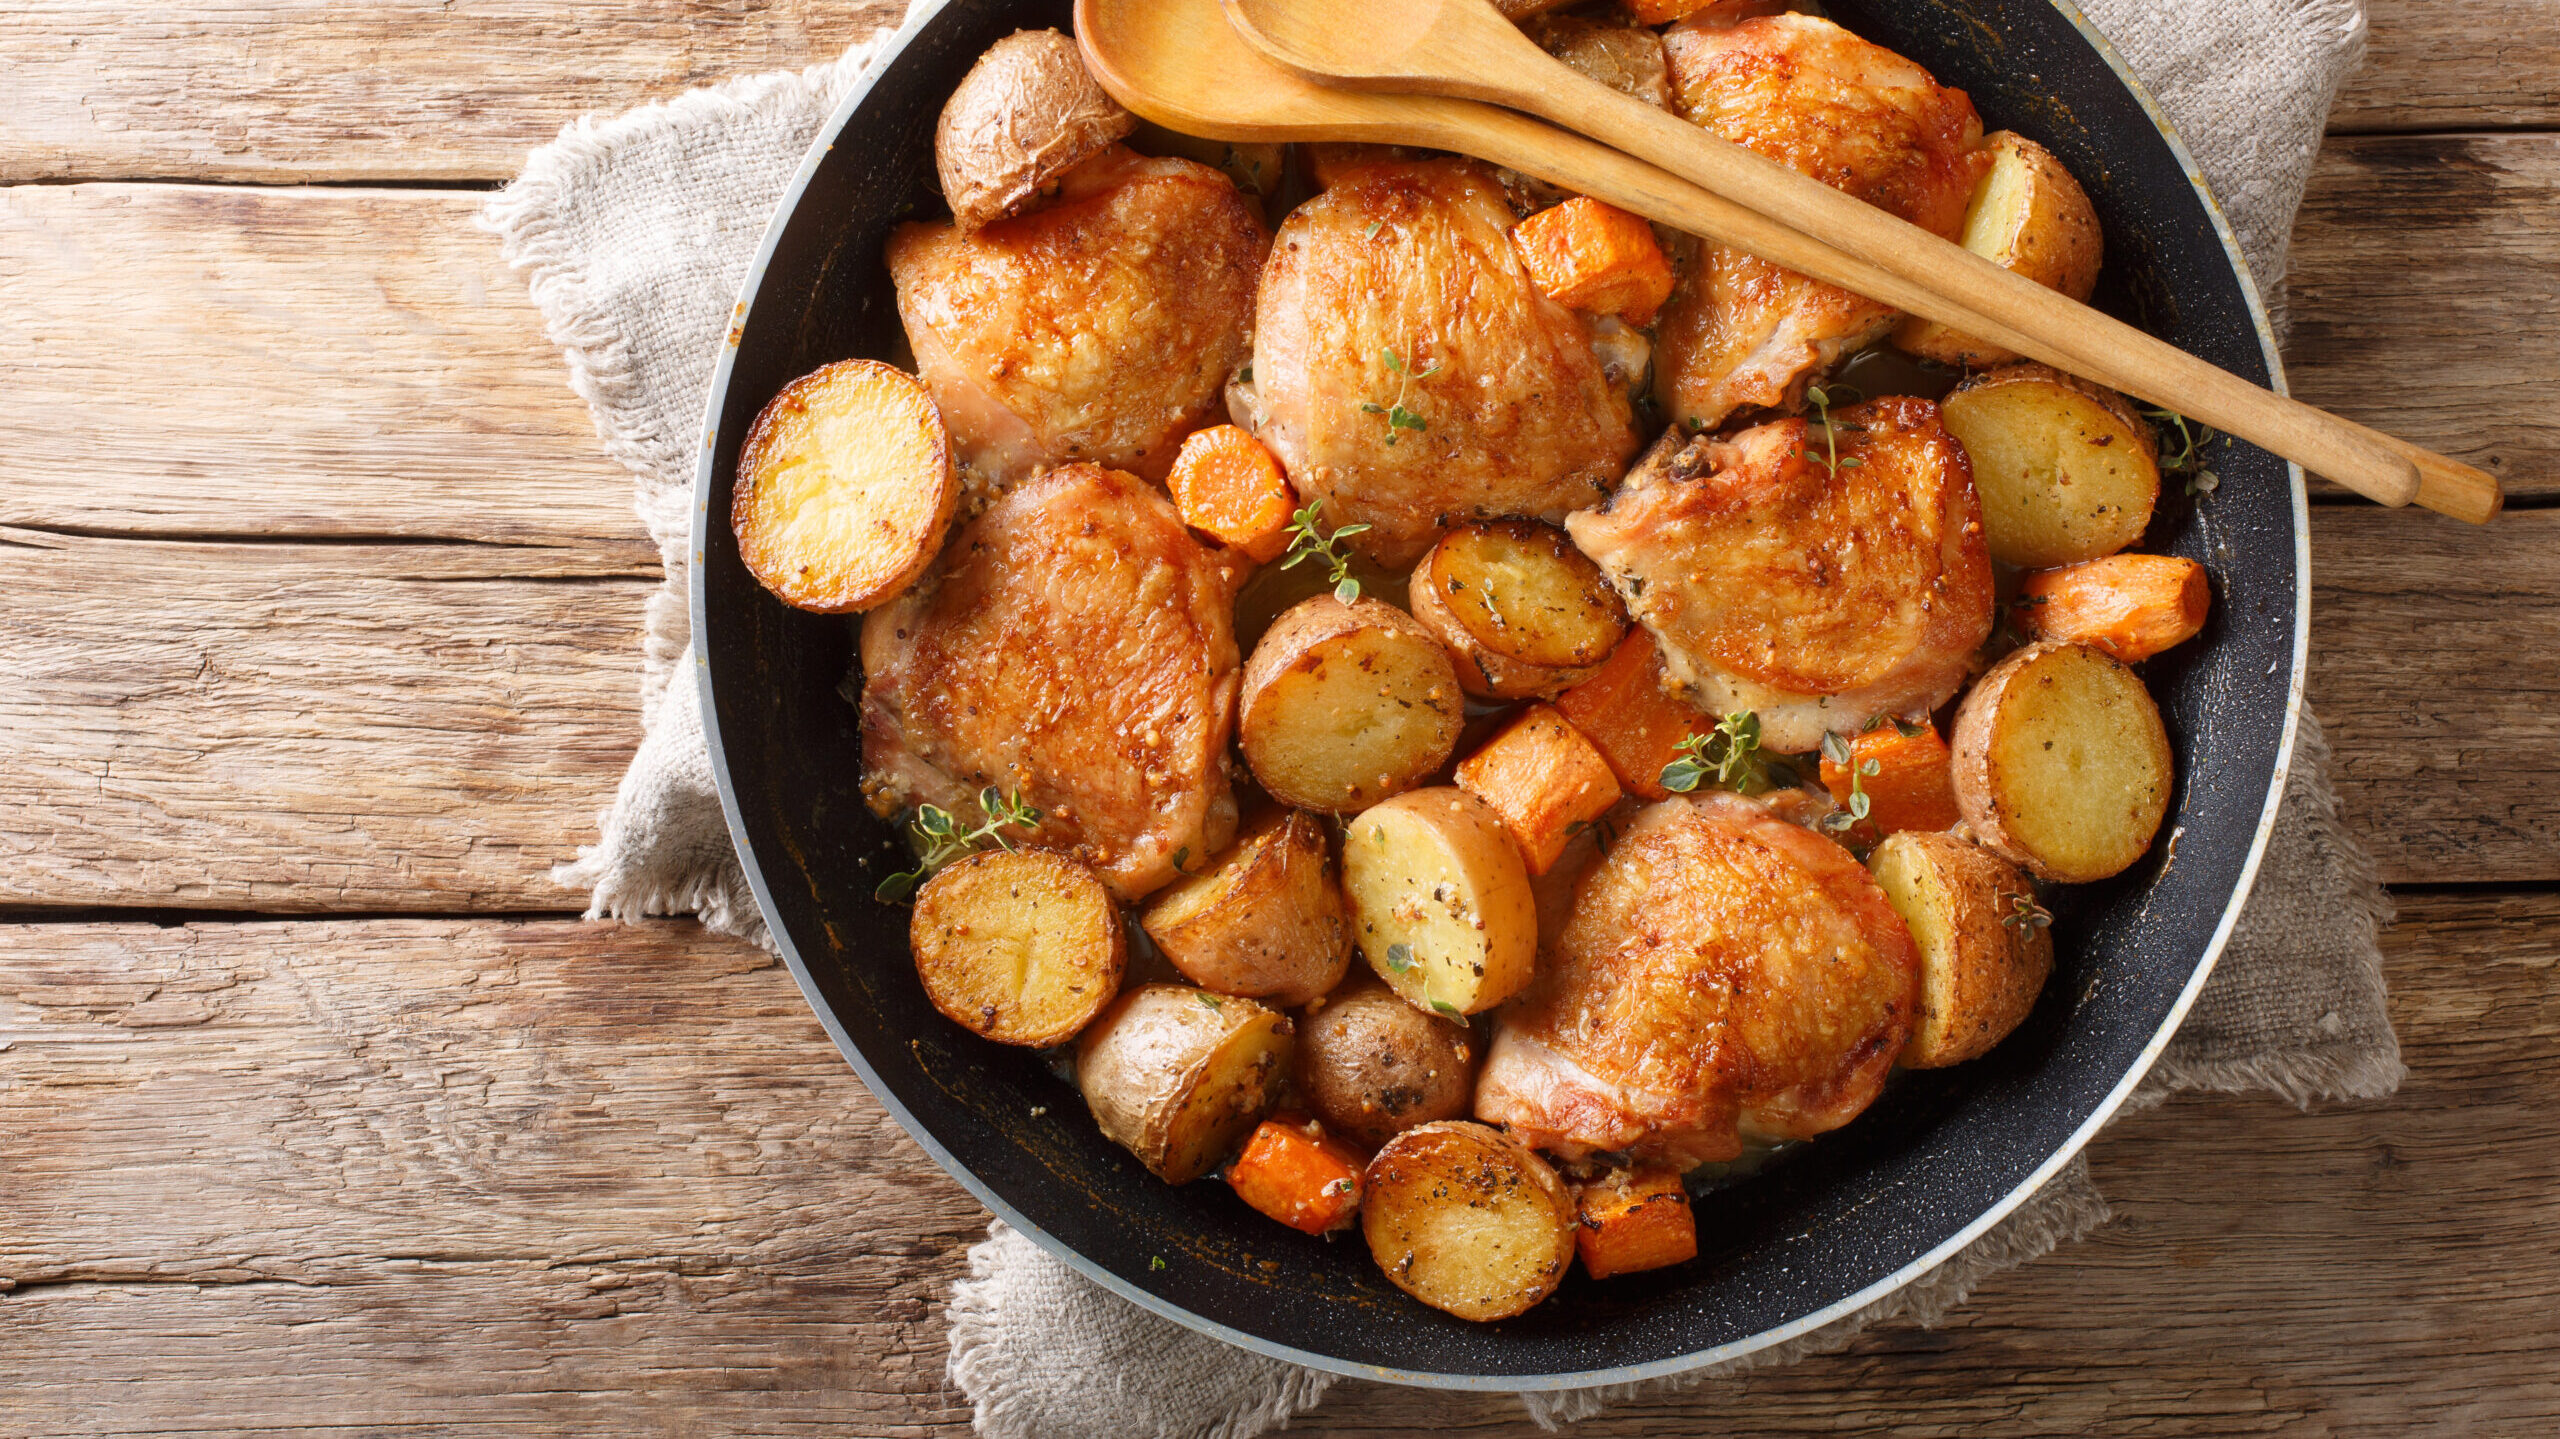 Image for One-Pot Dijon-Roasted Chicken with Carrots and Potatoes